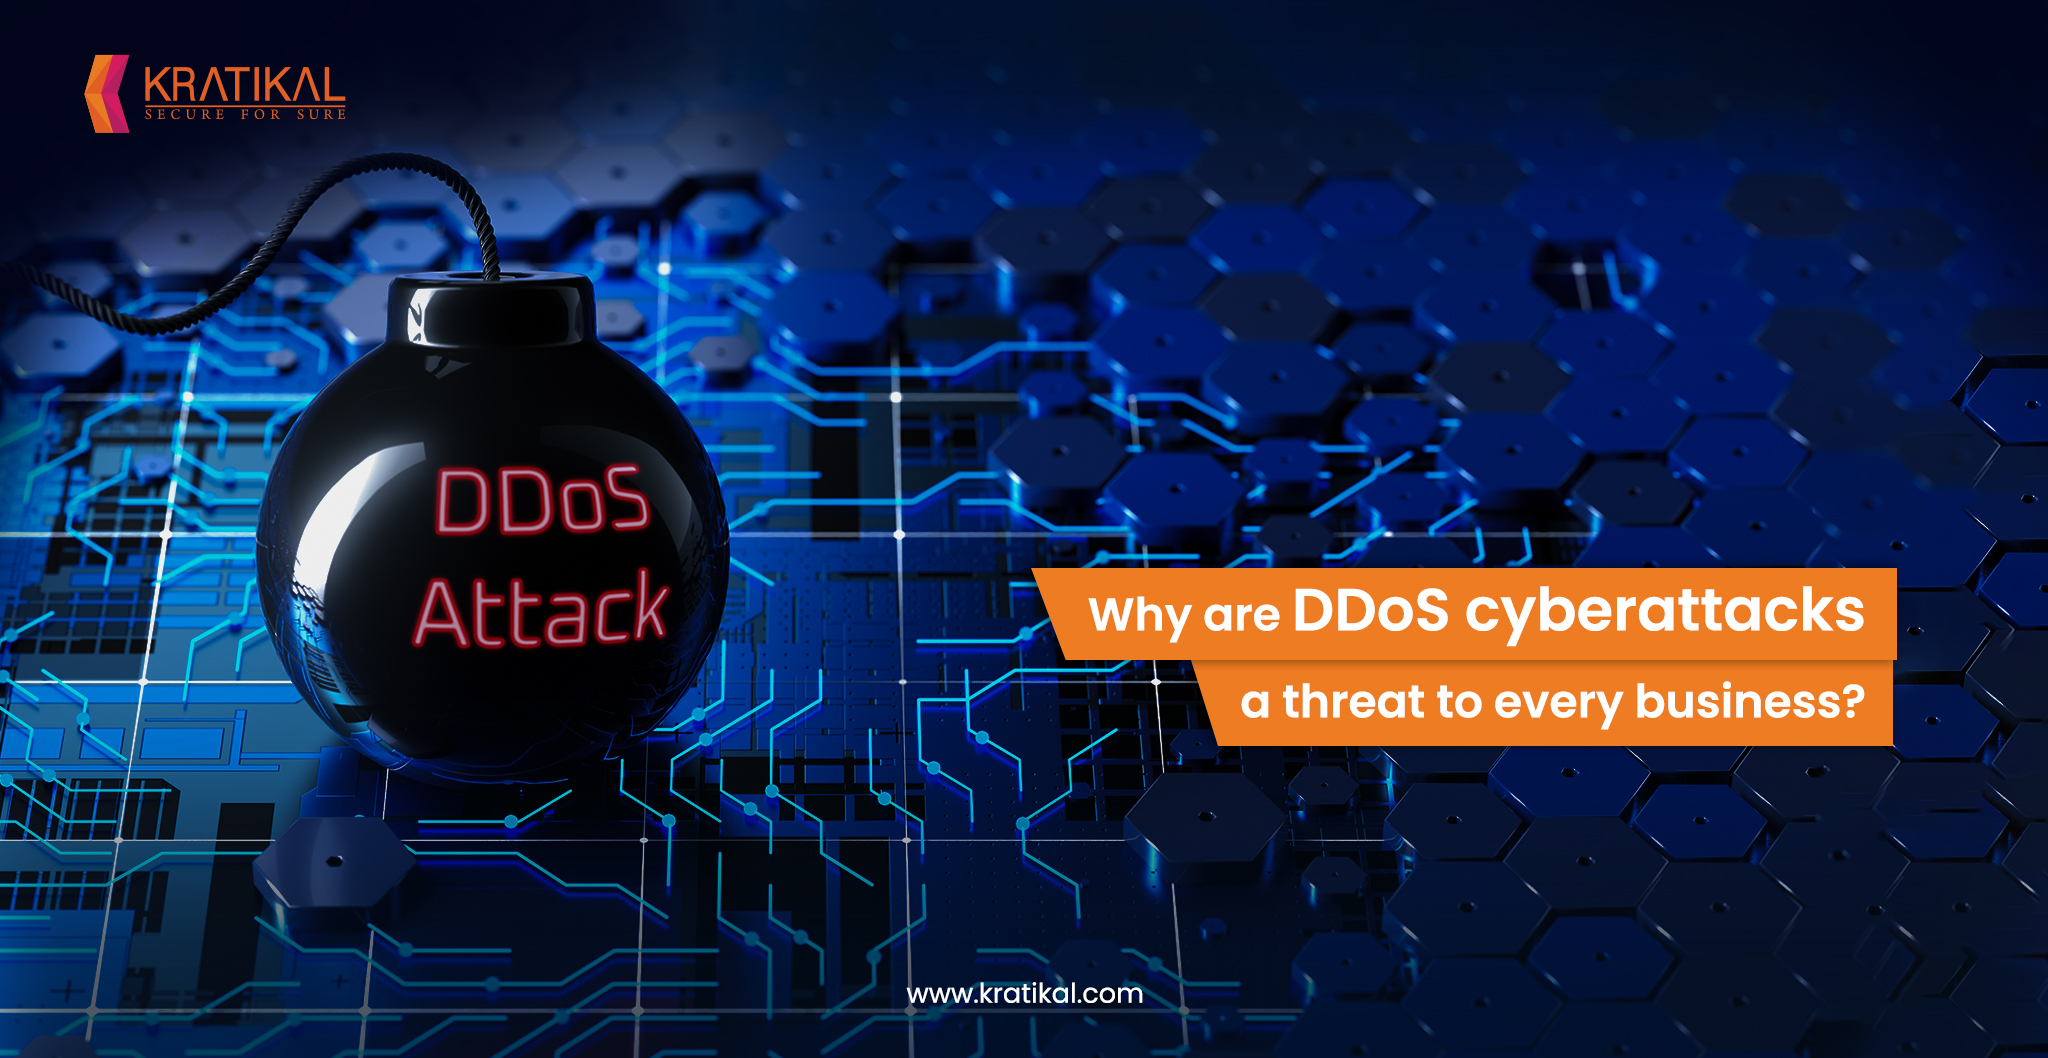 Why does every business face the threat of DDoS Cyber Attacks?